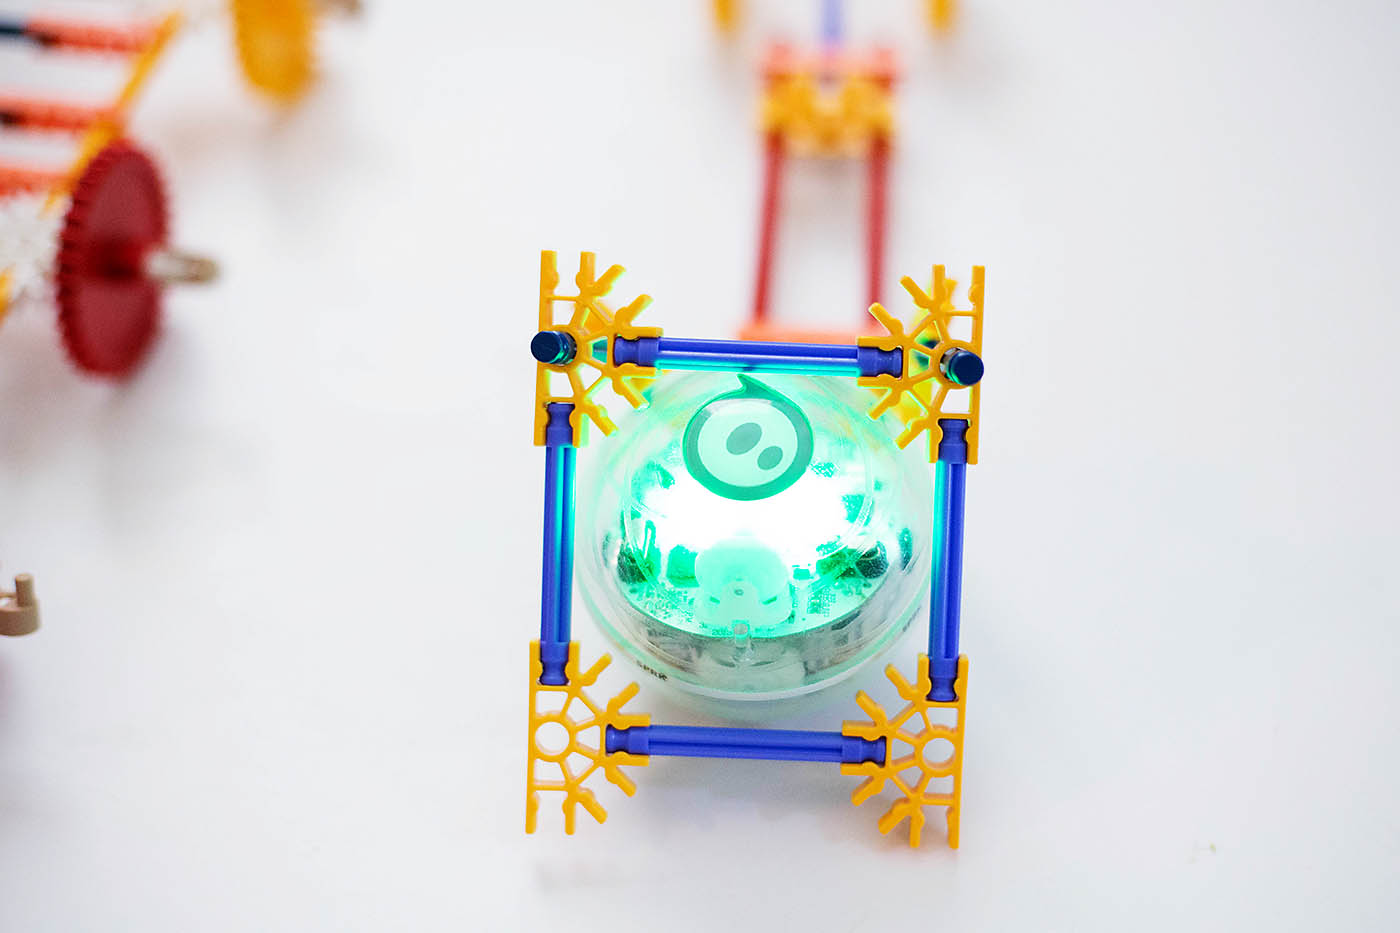 Sphero SPRK+ coding robot is SO cool and a perfect gift idea!